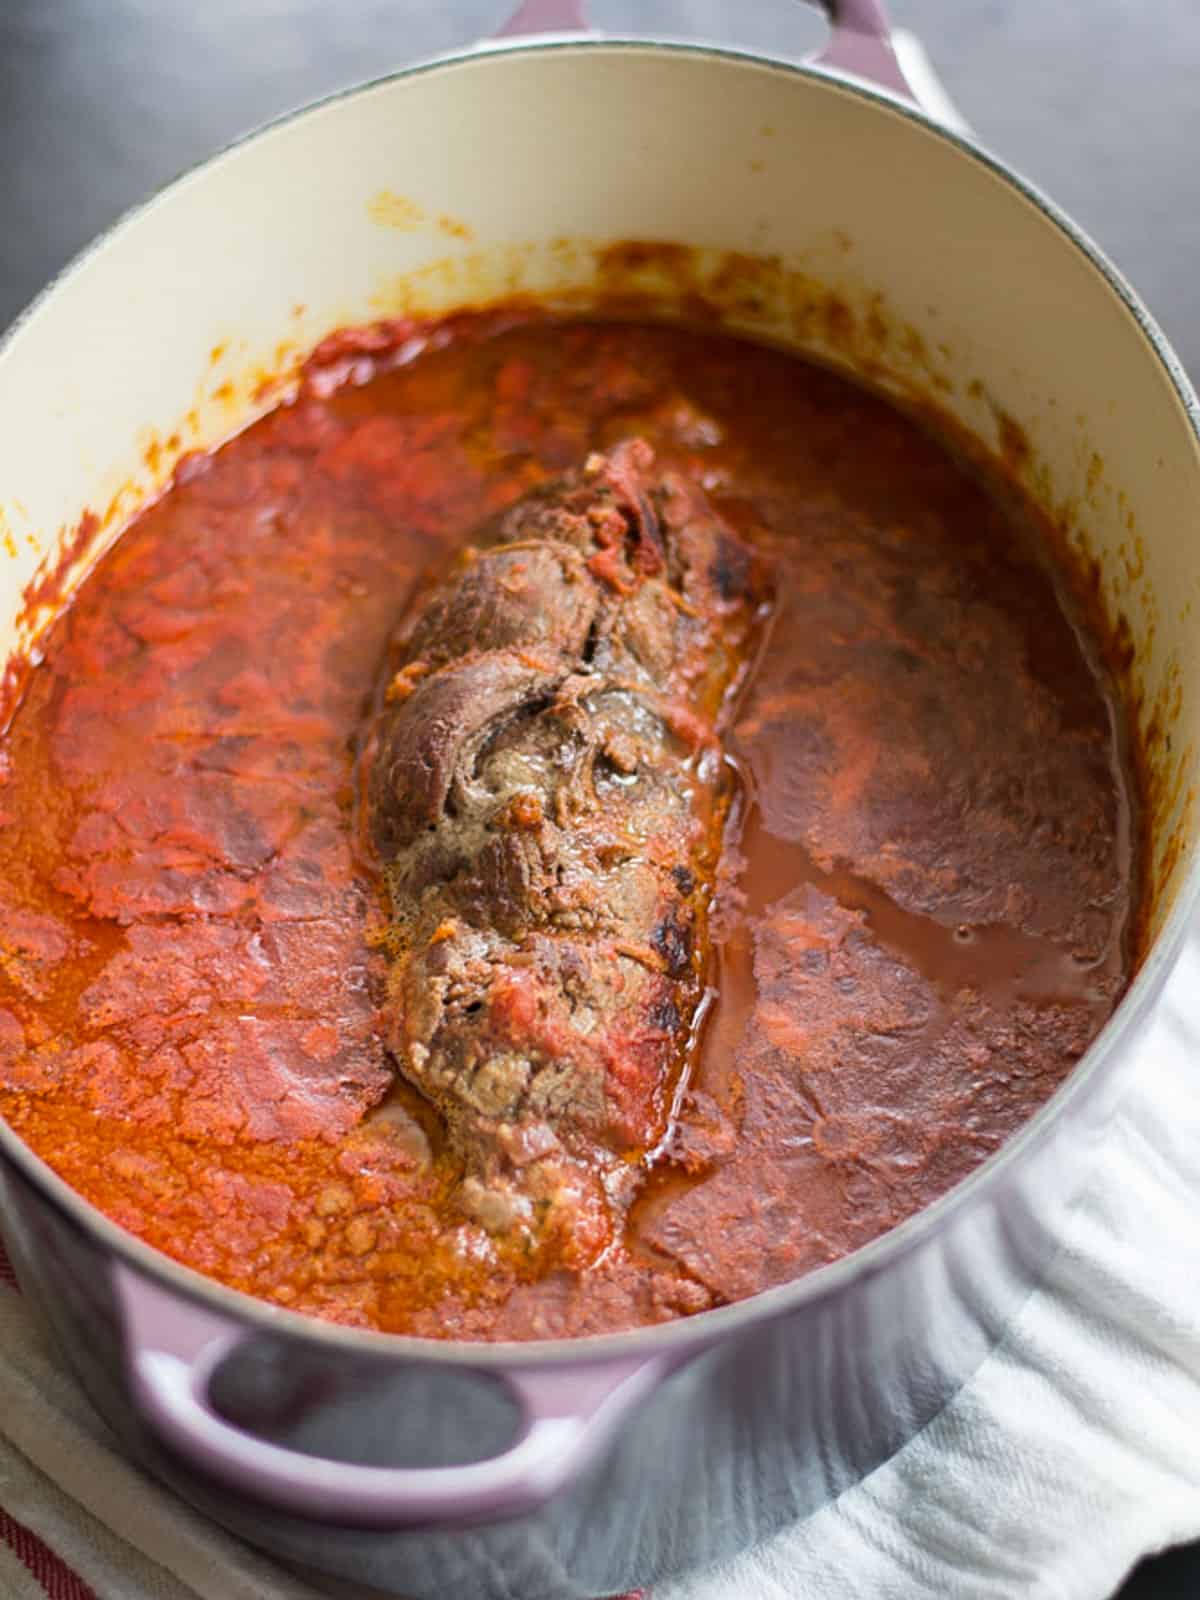 Seared braciole is simmered in a rich tomato sauce until tender.